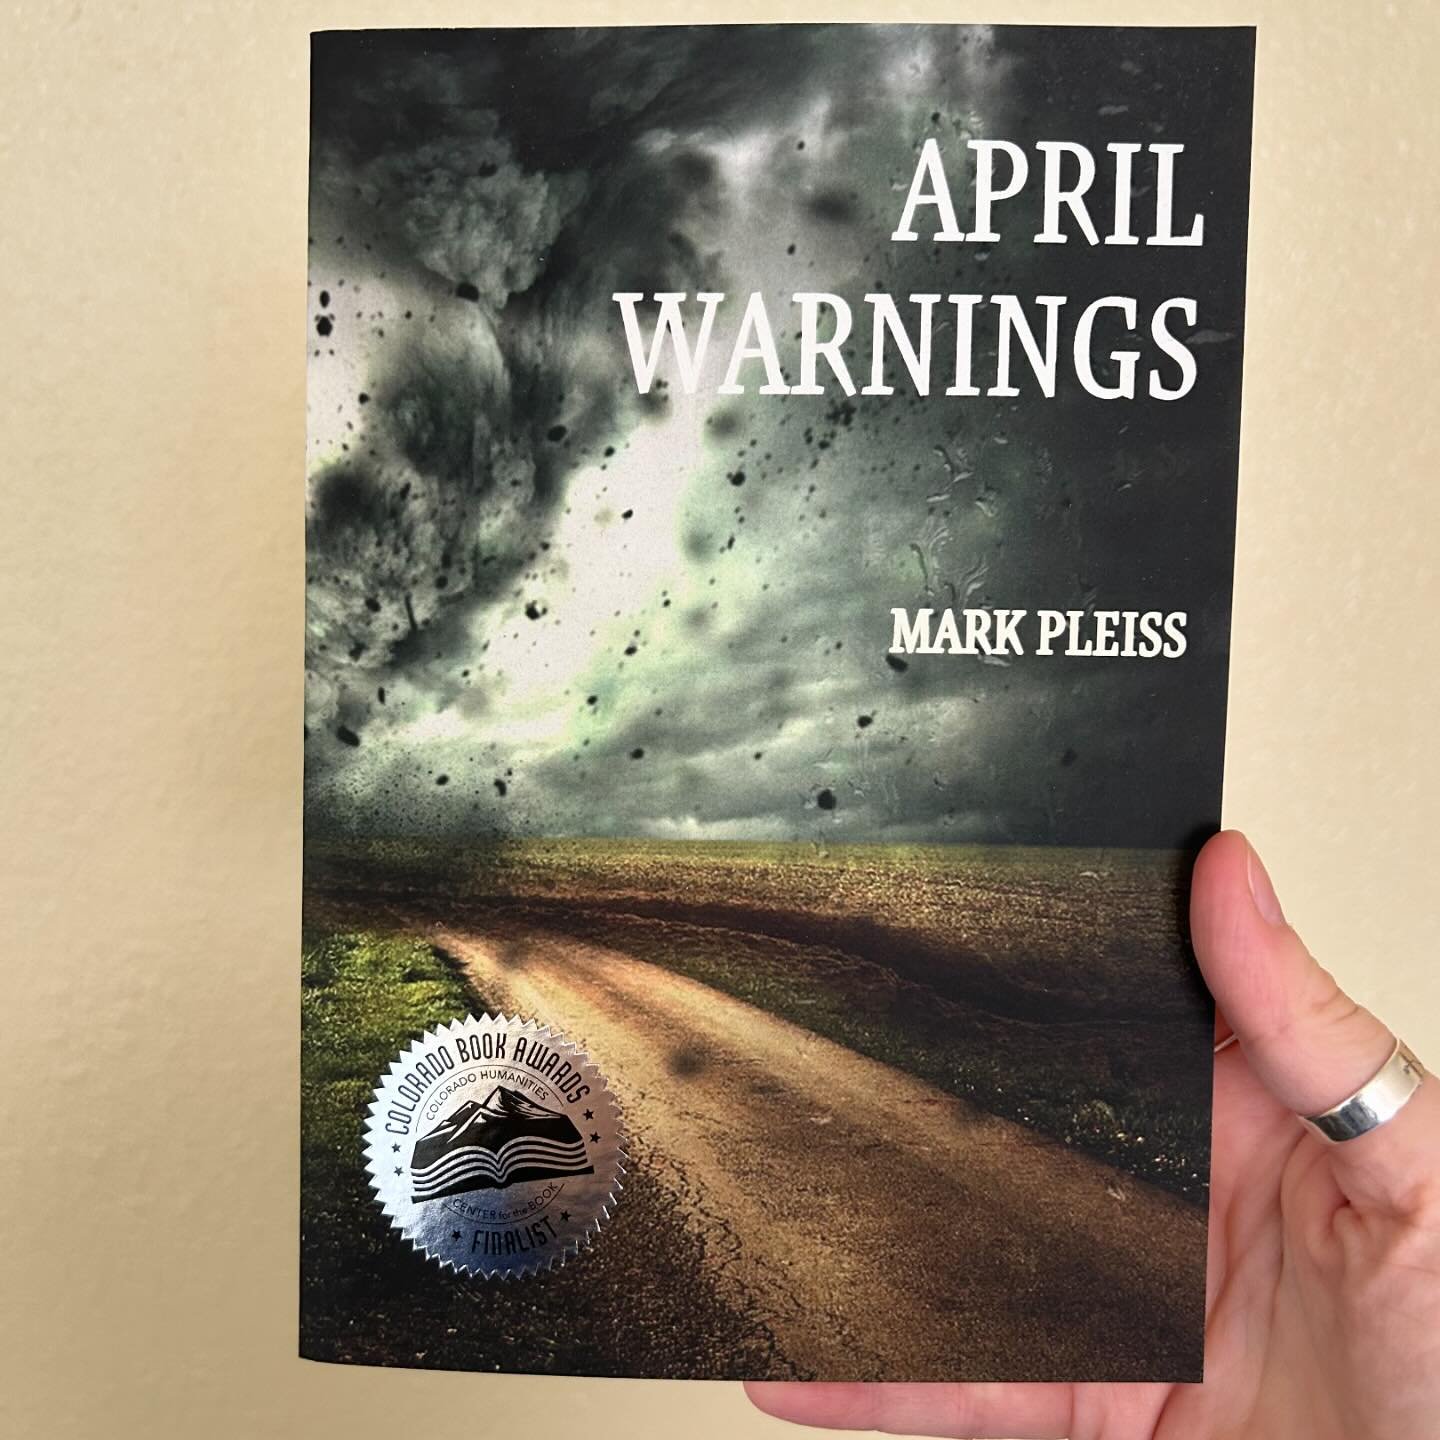 Warning: April is flying by, but there&rsquo;s still time to submit to our open reading period!!! Submit your poetry, prose, or translation manuscript by 5/5 🌤️
And be sure to check out APRIL WARNINGS, by Mark Pleiss!!! 
@markuijote 

#aprilwarnings